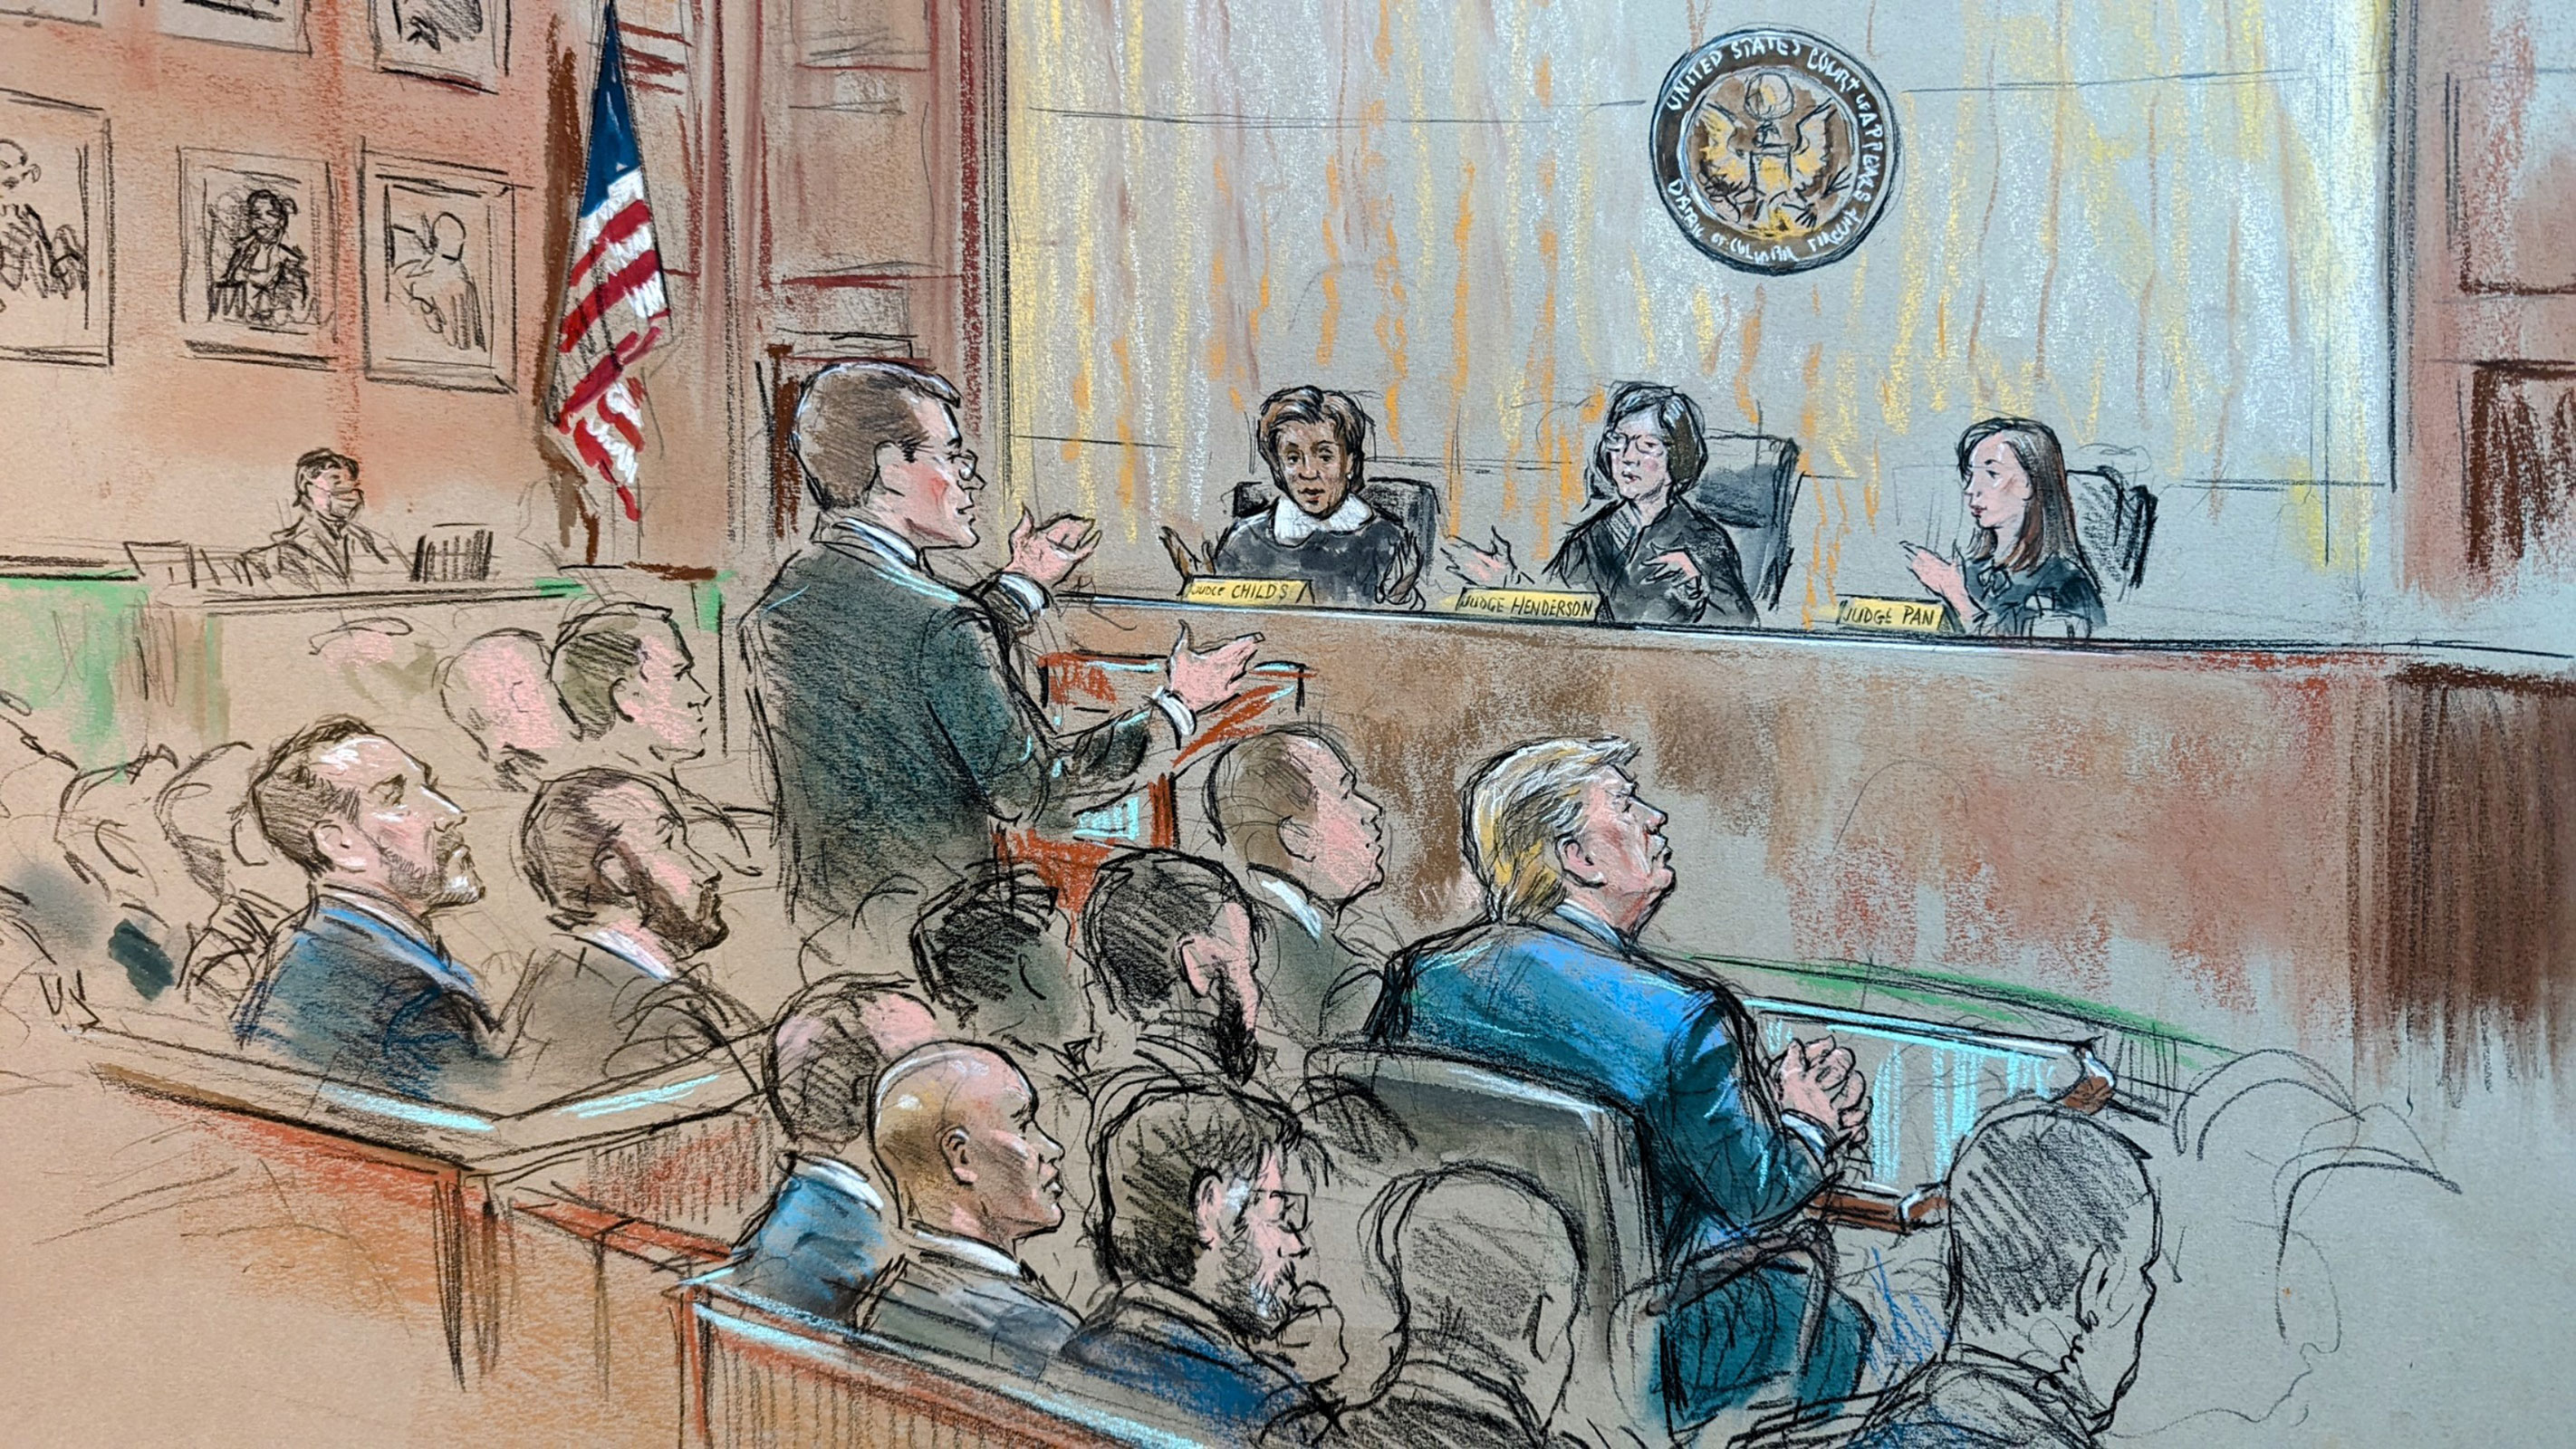 These sketches from court depict former President Donald Trump, seated right, listening as his attorney John Sauer, standing, speaks before the DC Circuit Court of Appeals at the federal courthouse on Tuesday, January 9, in Washington, DC. 